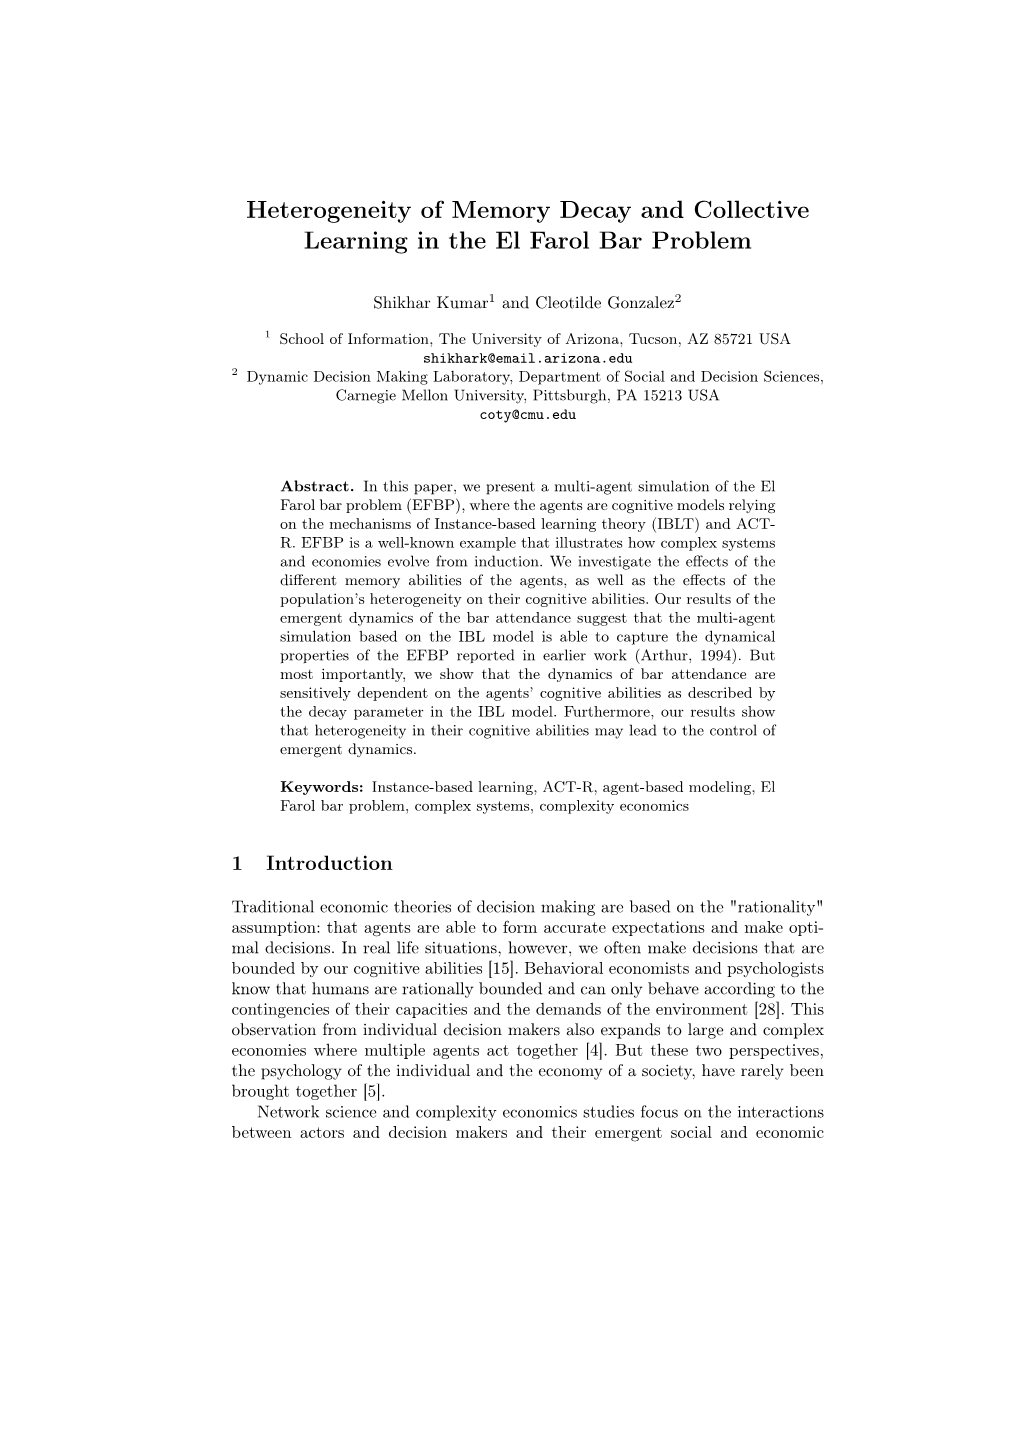 Heterogeneity of Memory Decay and Collective Learning in the El Farol Bar Problem